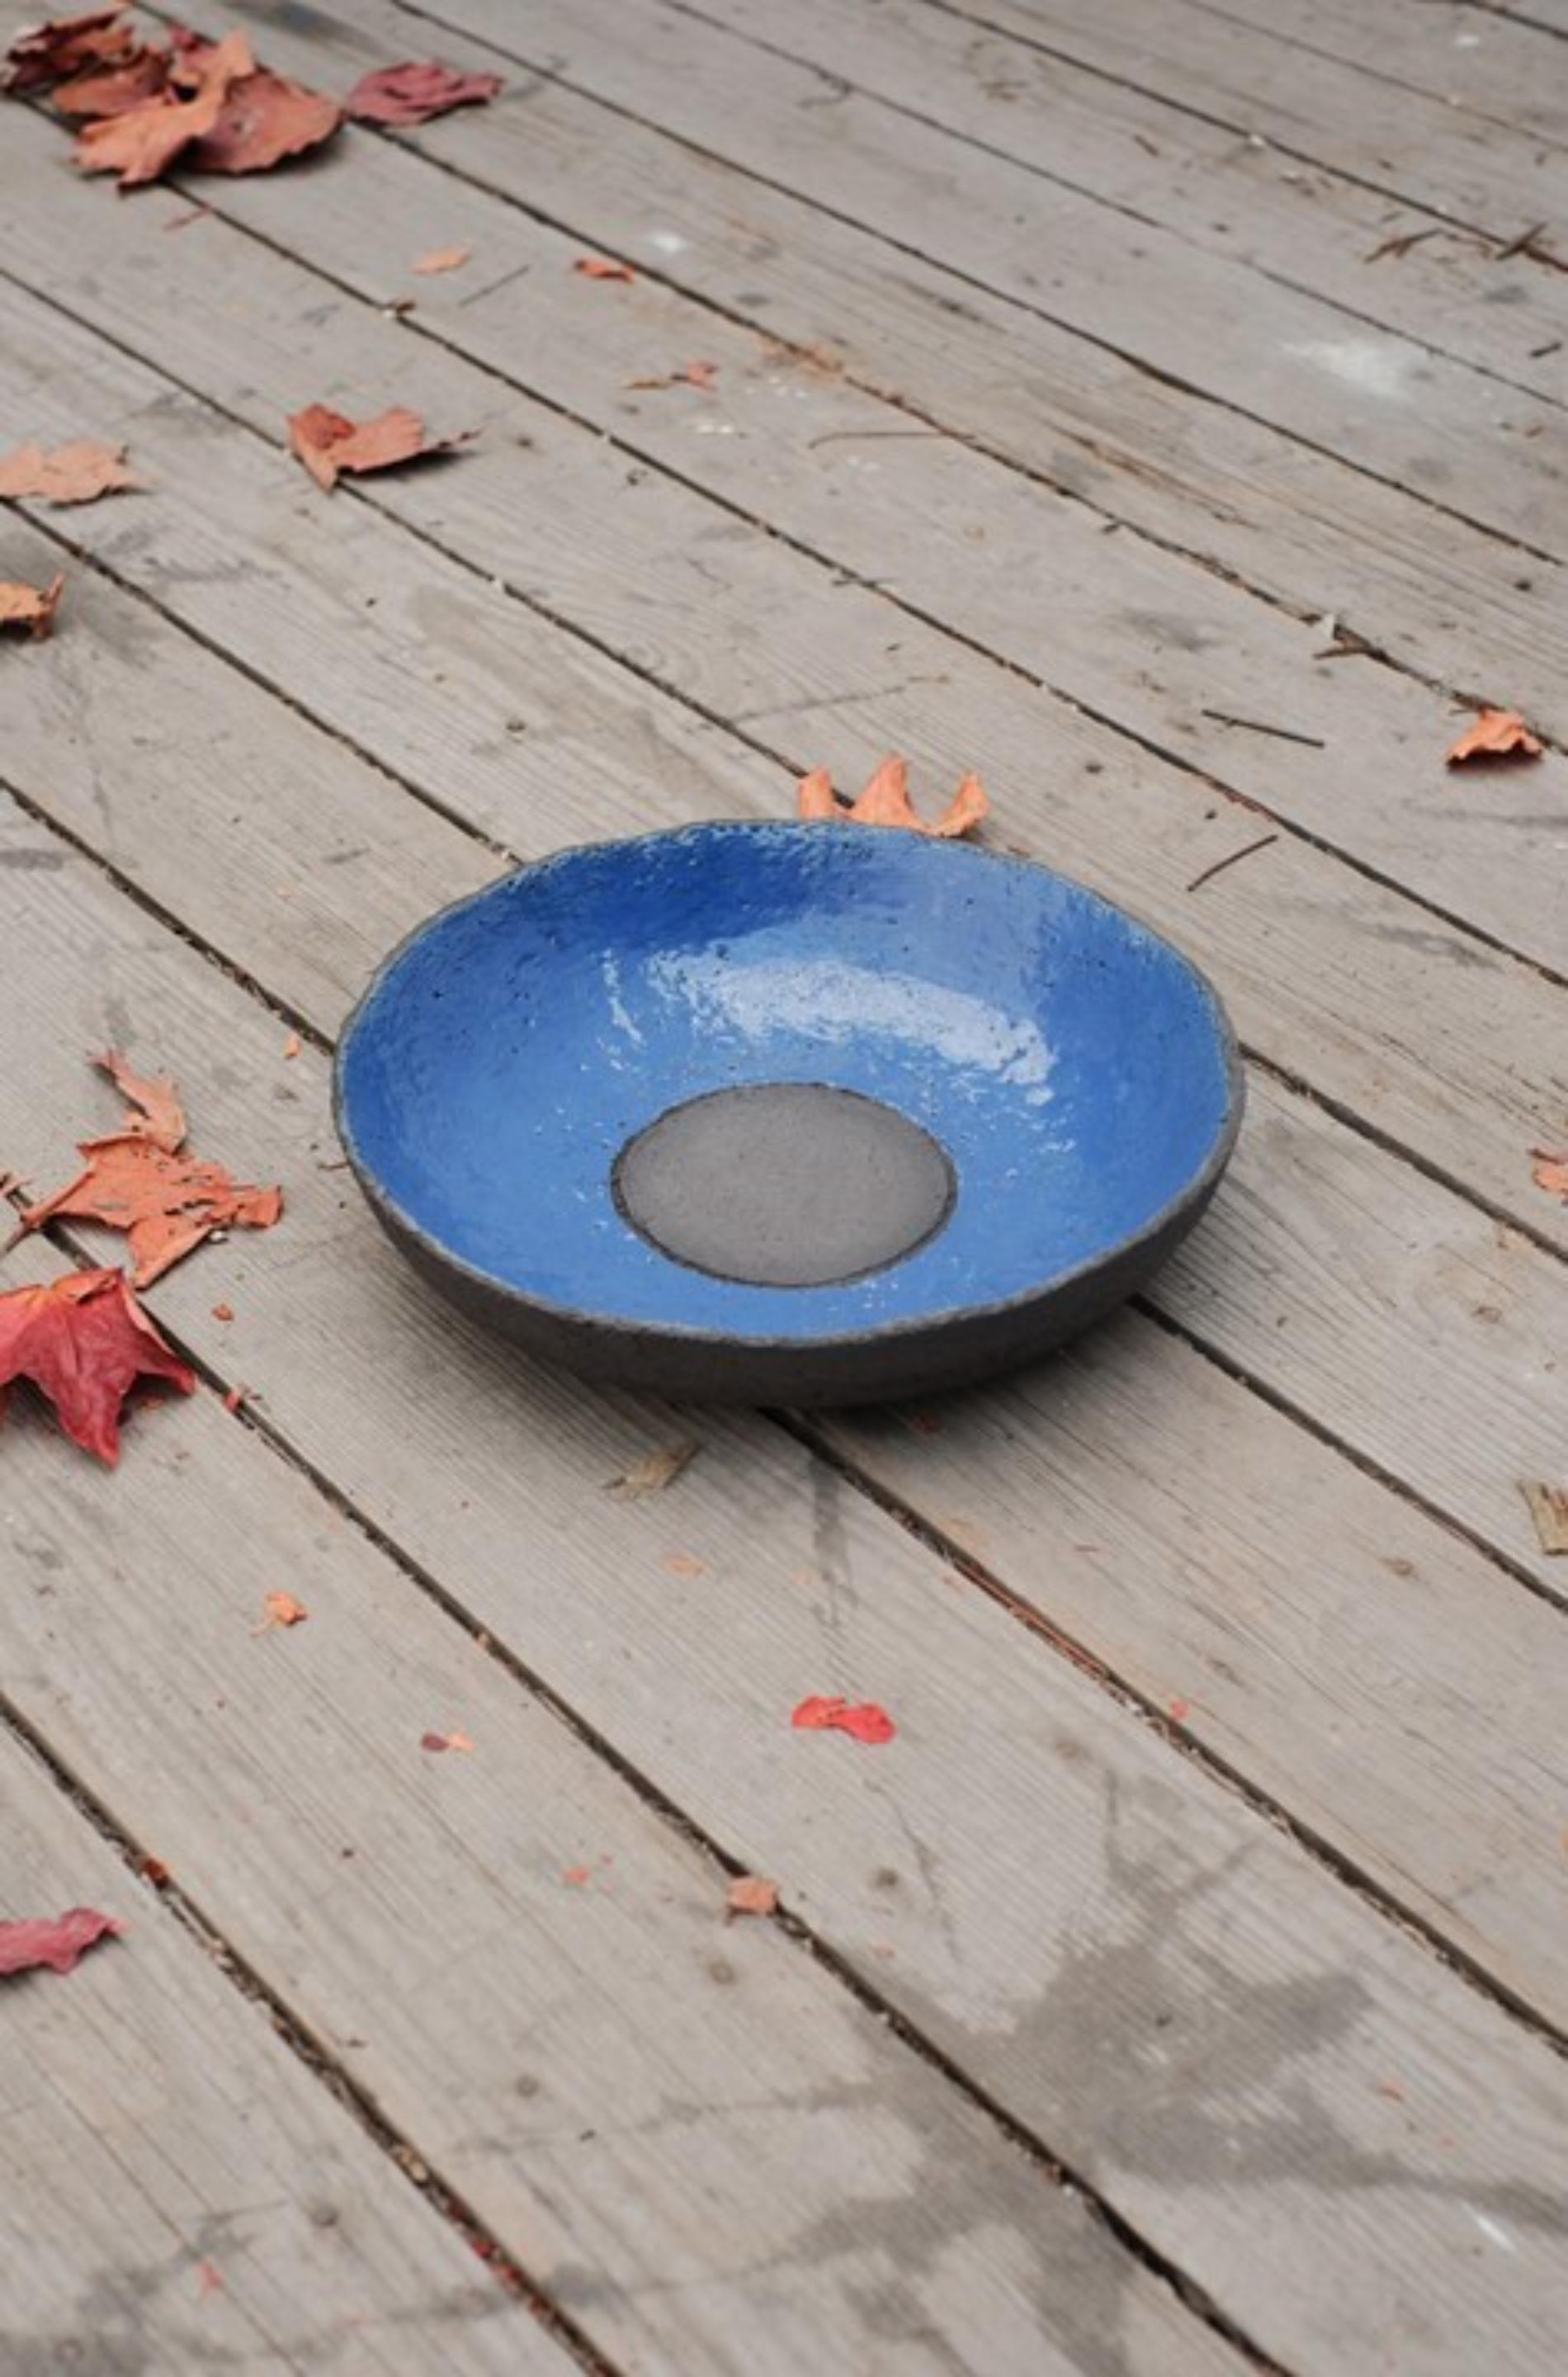 Small, low bowl by Atelier Ledure.
Dimensions: D 28 x H 6 cm.
Materials: ceramics - stoneware.
Also available: other variations available.

A protest against polished stoneware.
The bowls are the result and expression of a series of